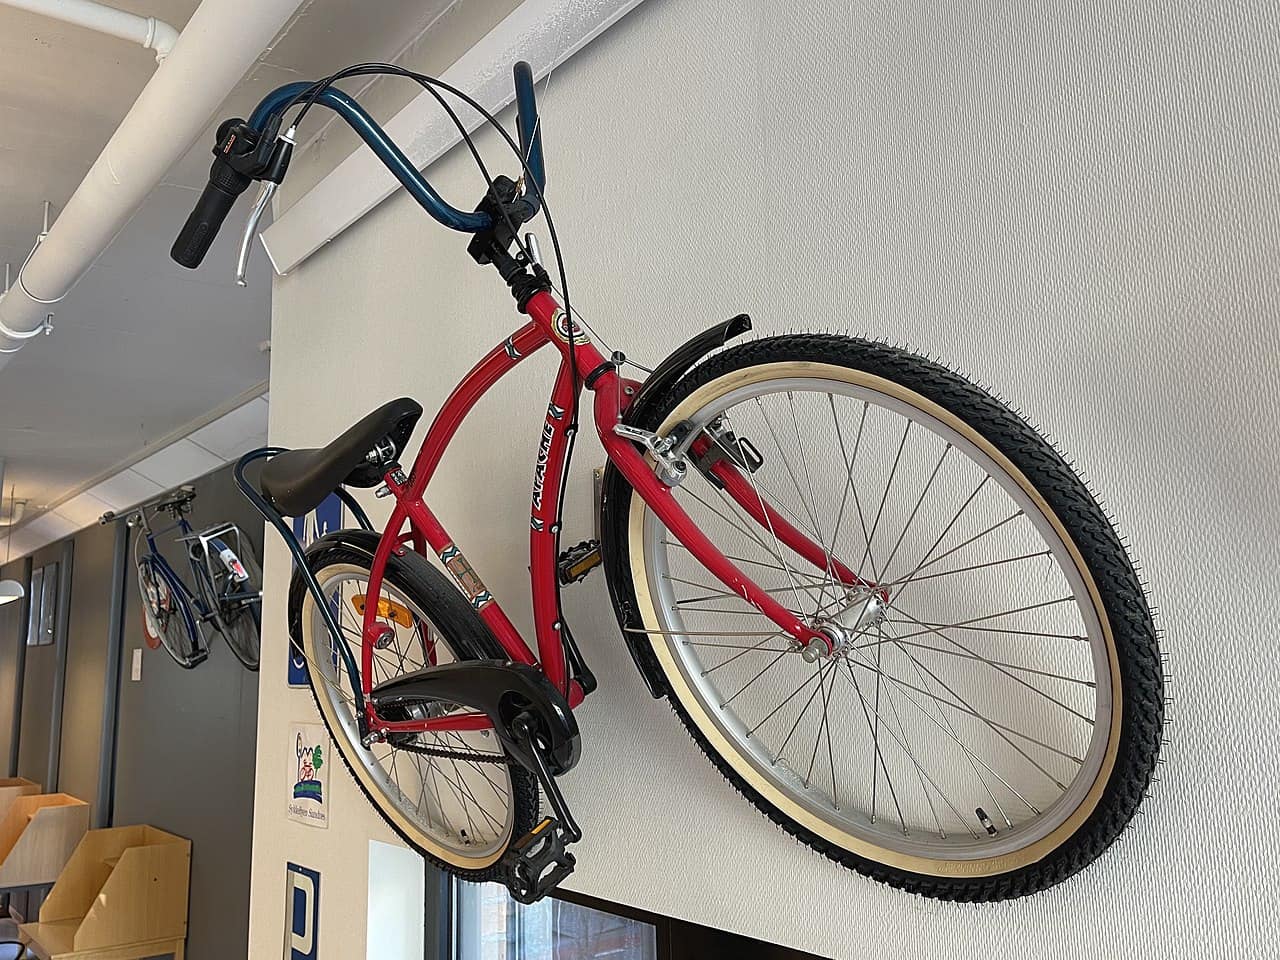 3 Ways To Hang A Bike From the ceiling described in detail